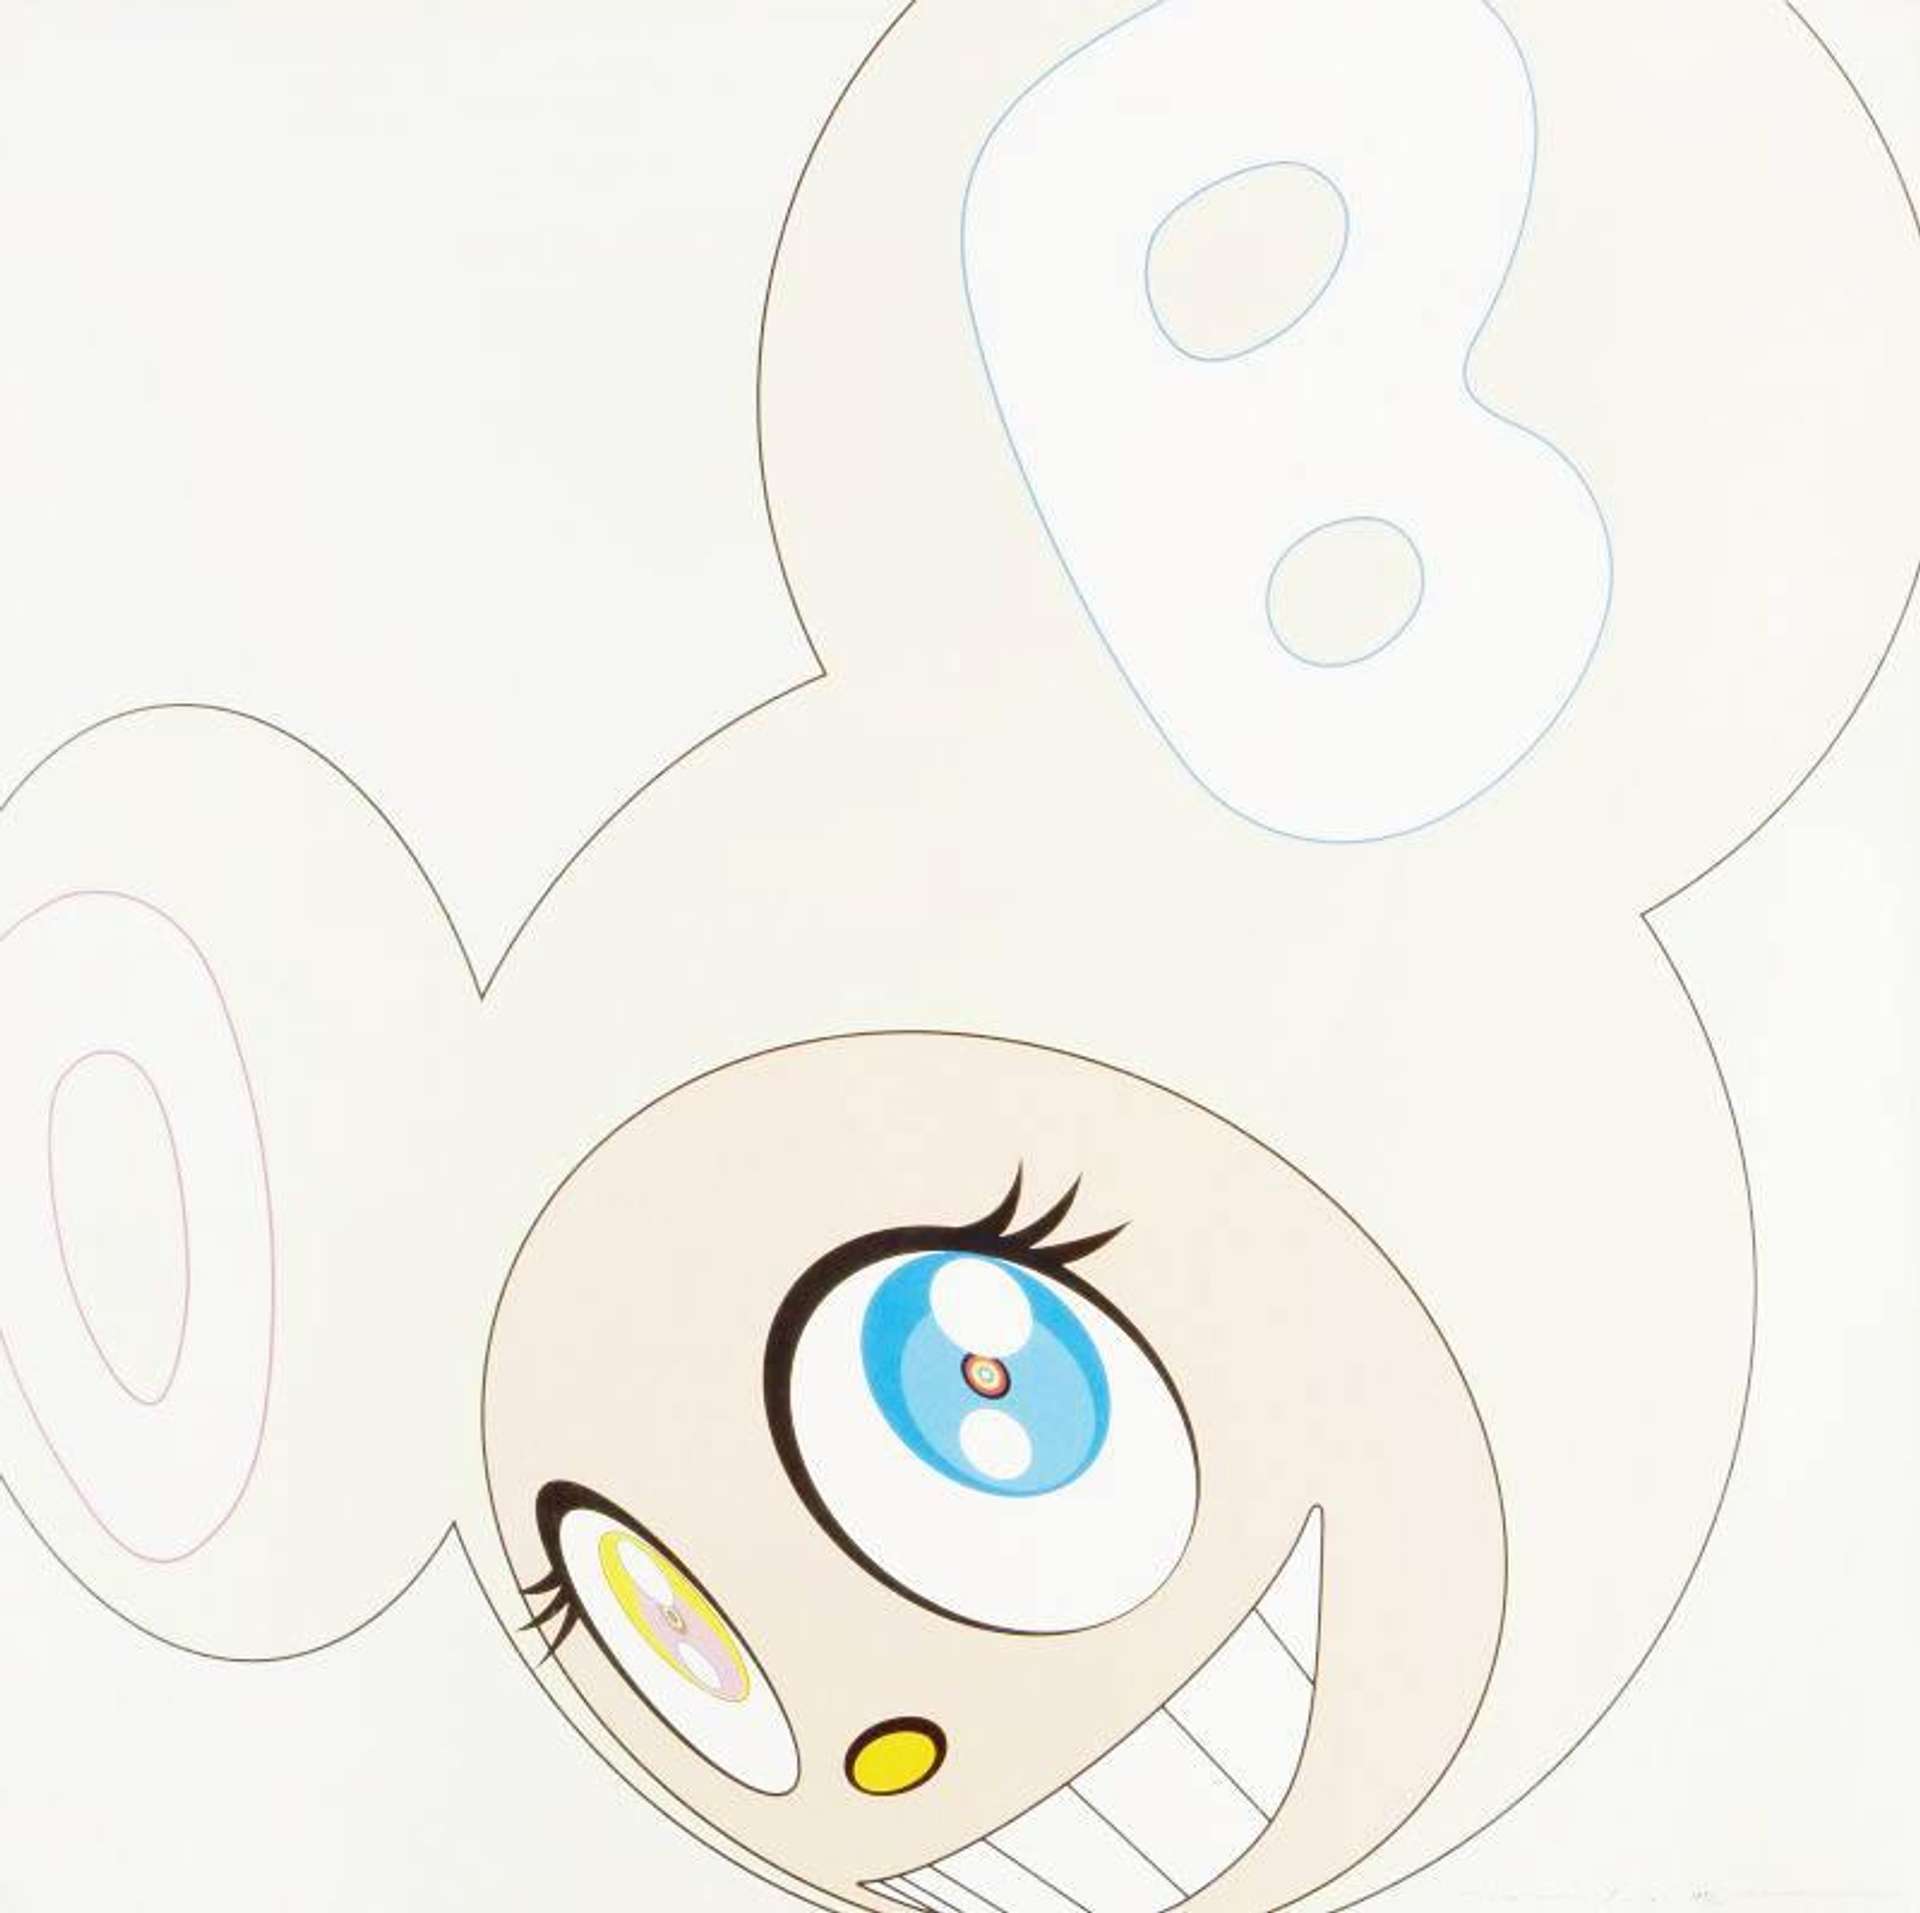 Close up of animated character with one yellow eye and one blue eye, smiling